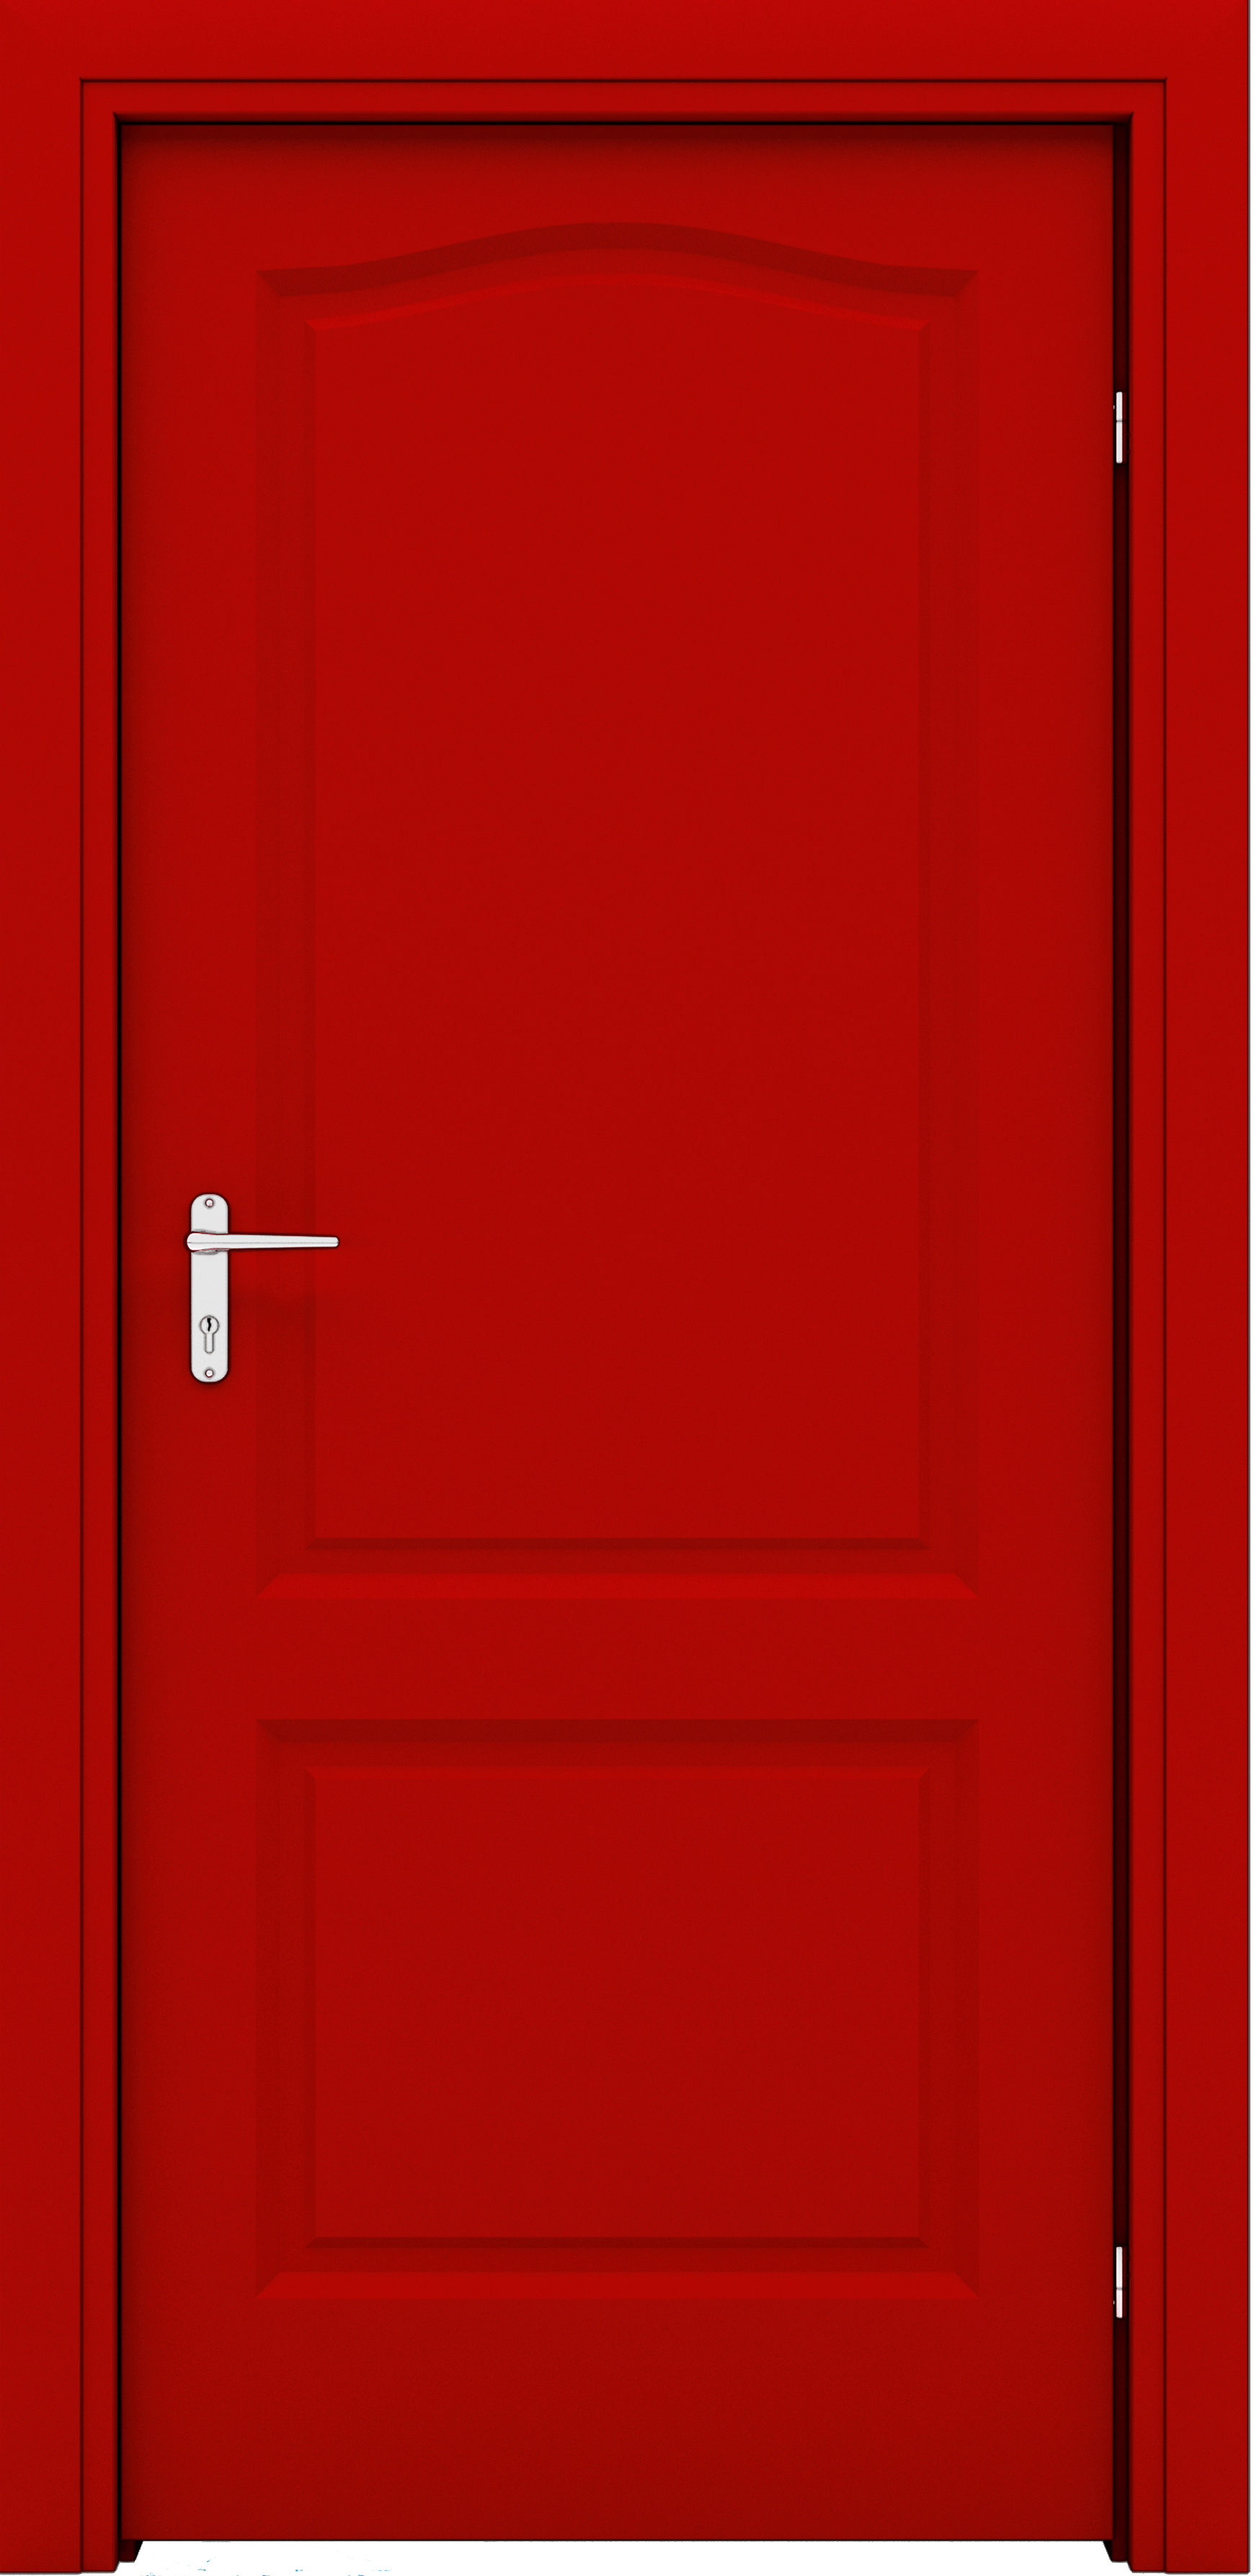 Walk Through The Red Door for Autism Foundation